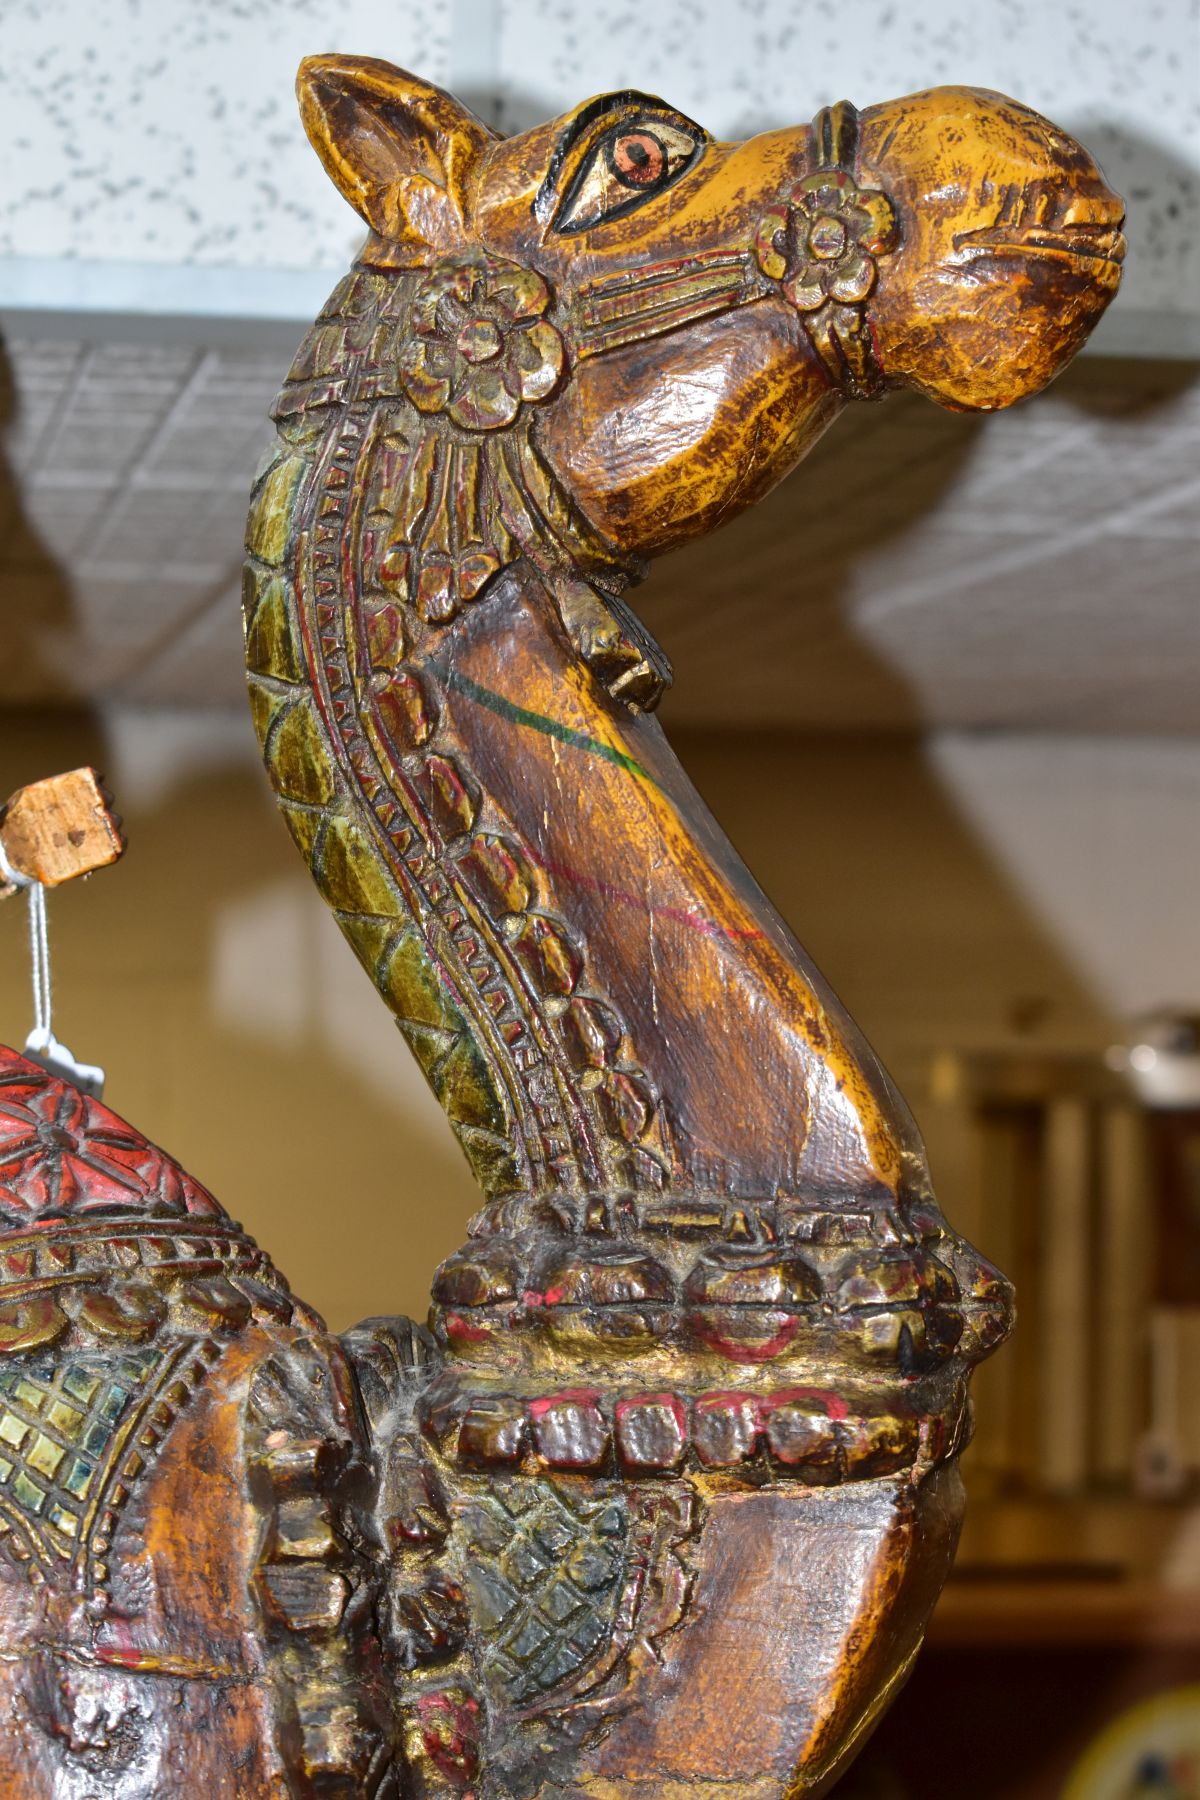 A LARGE WOODEN CARVED CAMEL WITH RIDERS, with carved and painted details, it may depict the - Image 7 of 9